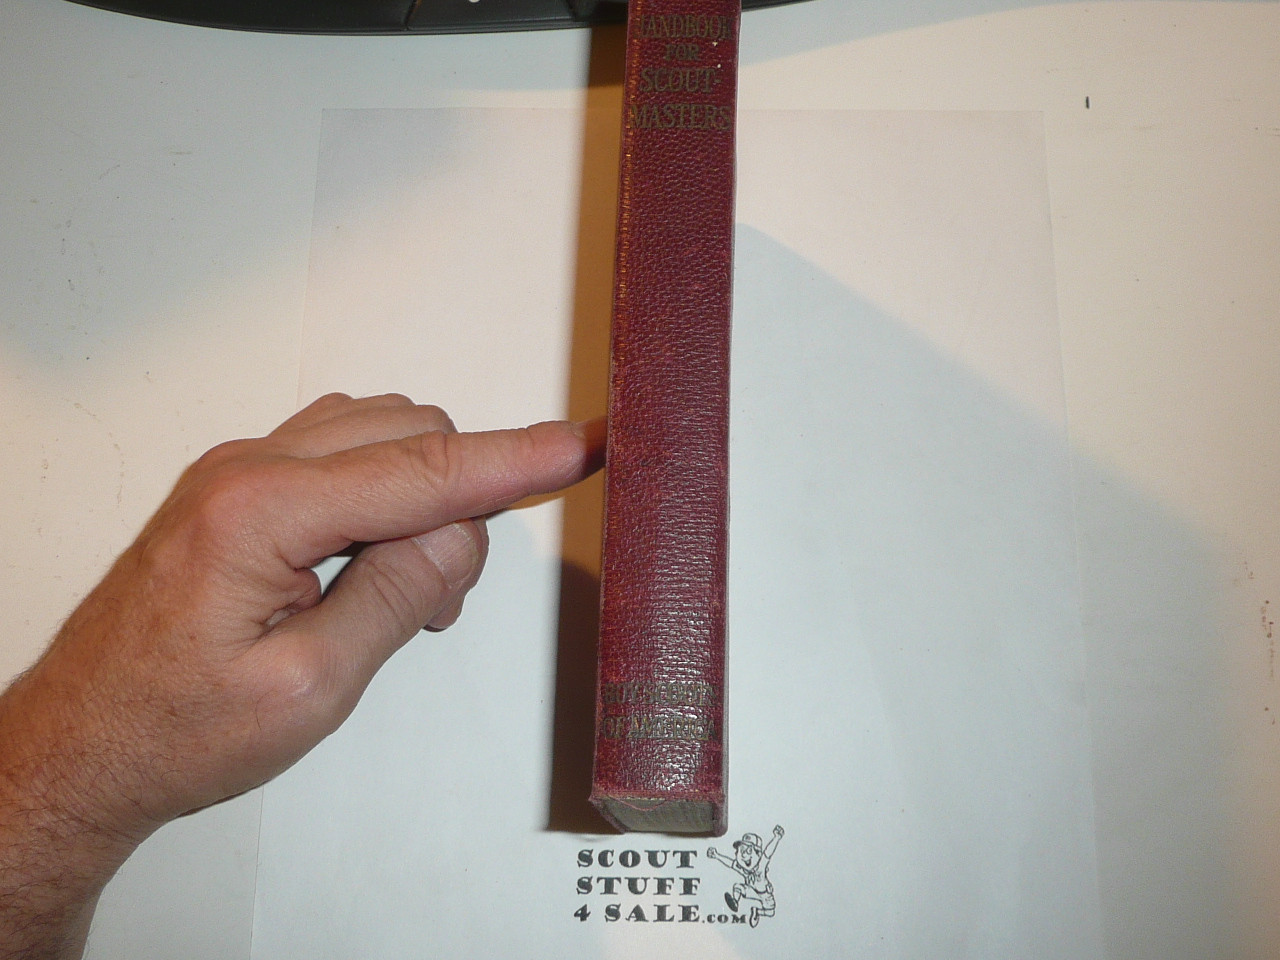 1925 Handbook For Scoutmasters, Second Edition, eighth Printing, lite wear, Maroon color cover